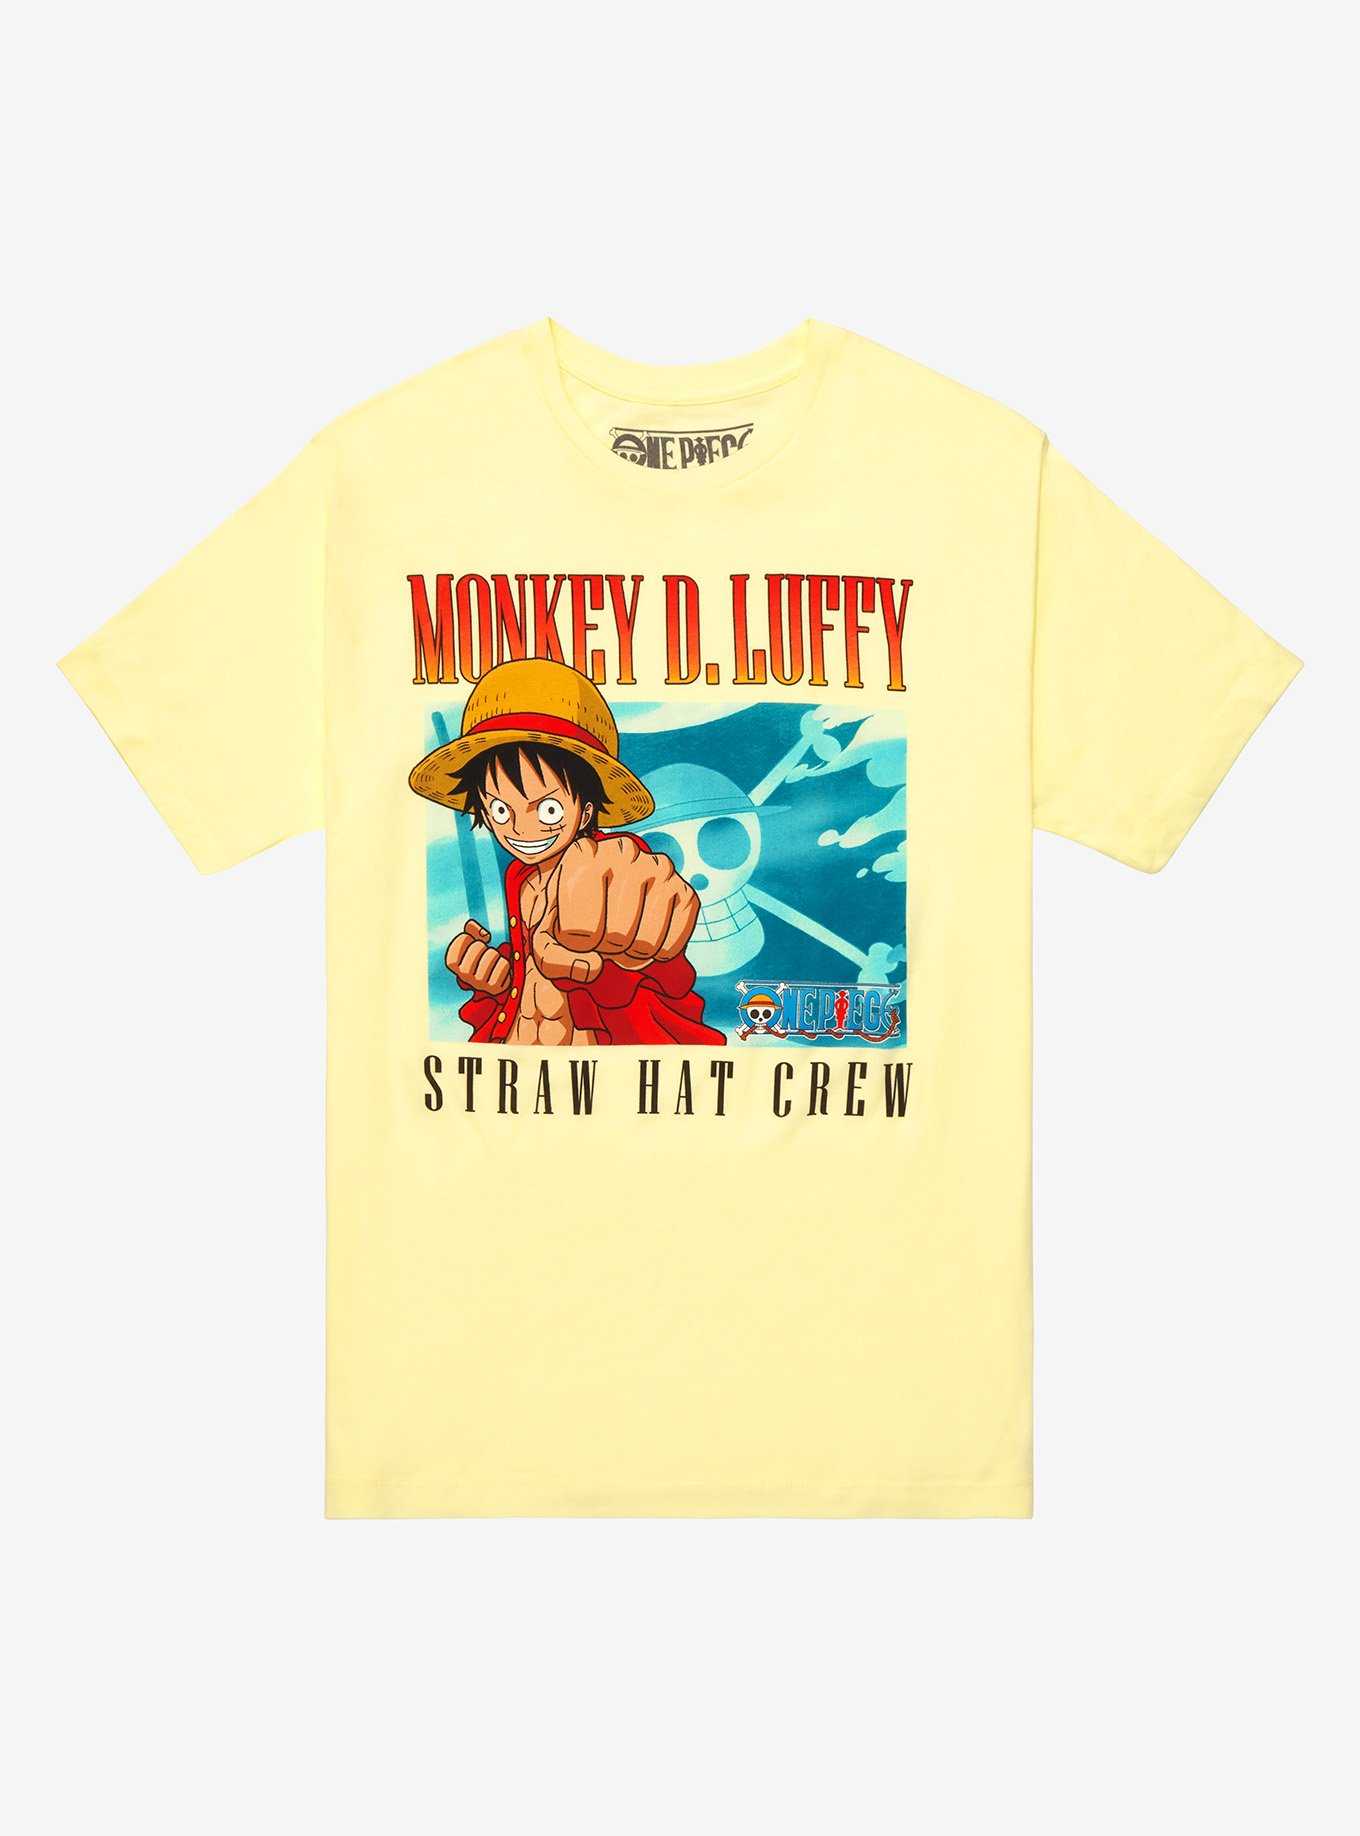 One Piece Monkey D. Luffy Character Panel Women's T-Shirt - BoxLunch Exclusive, , hi-res